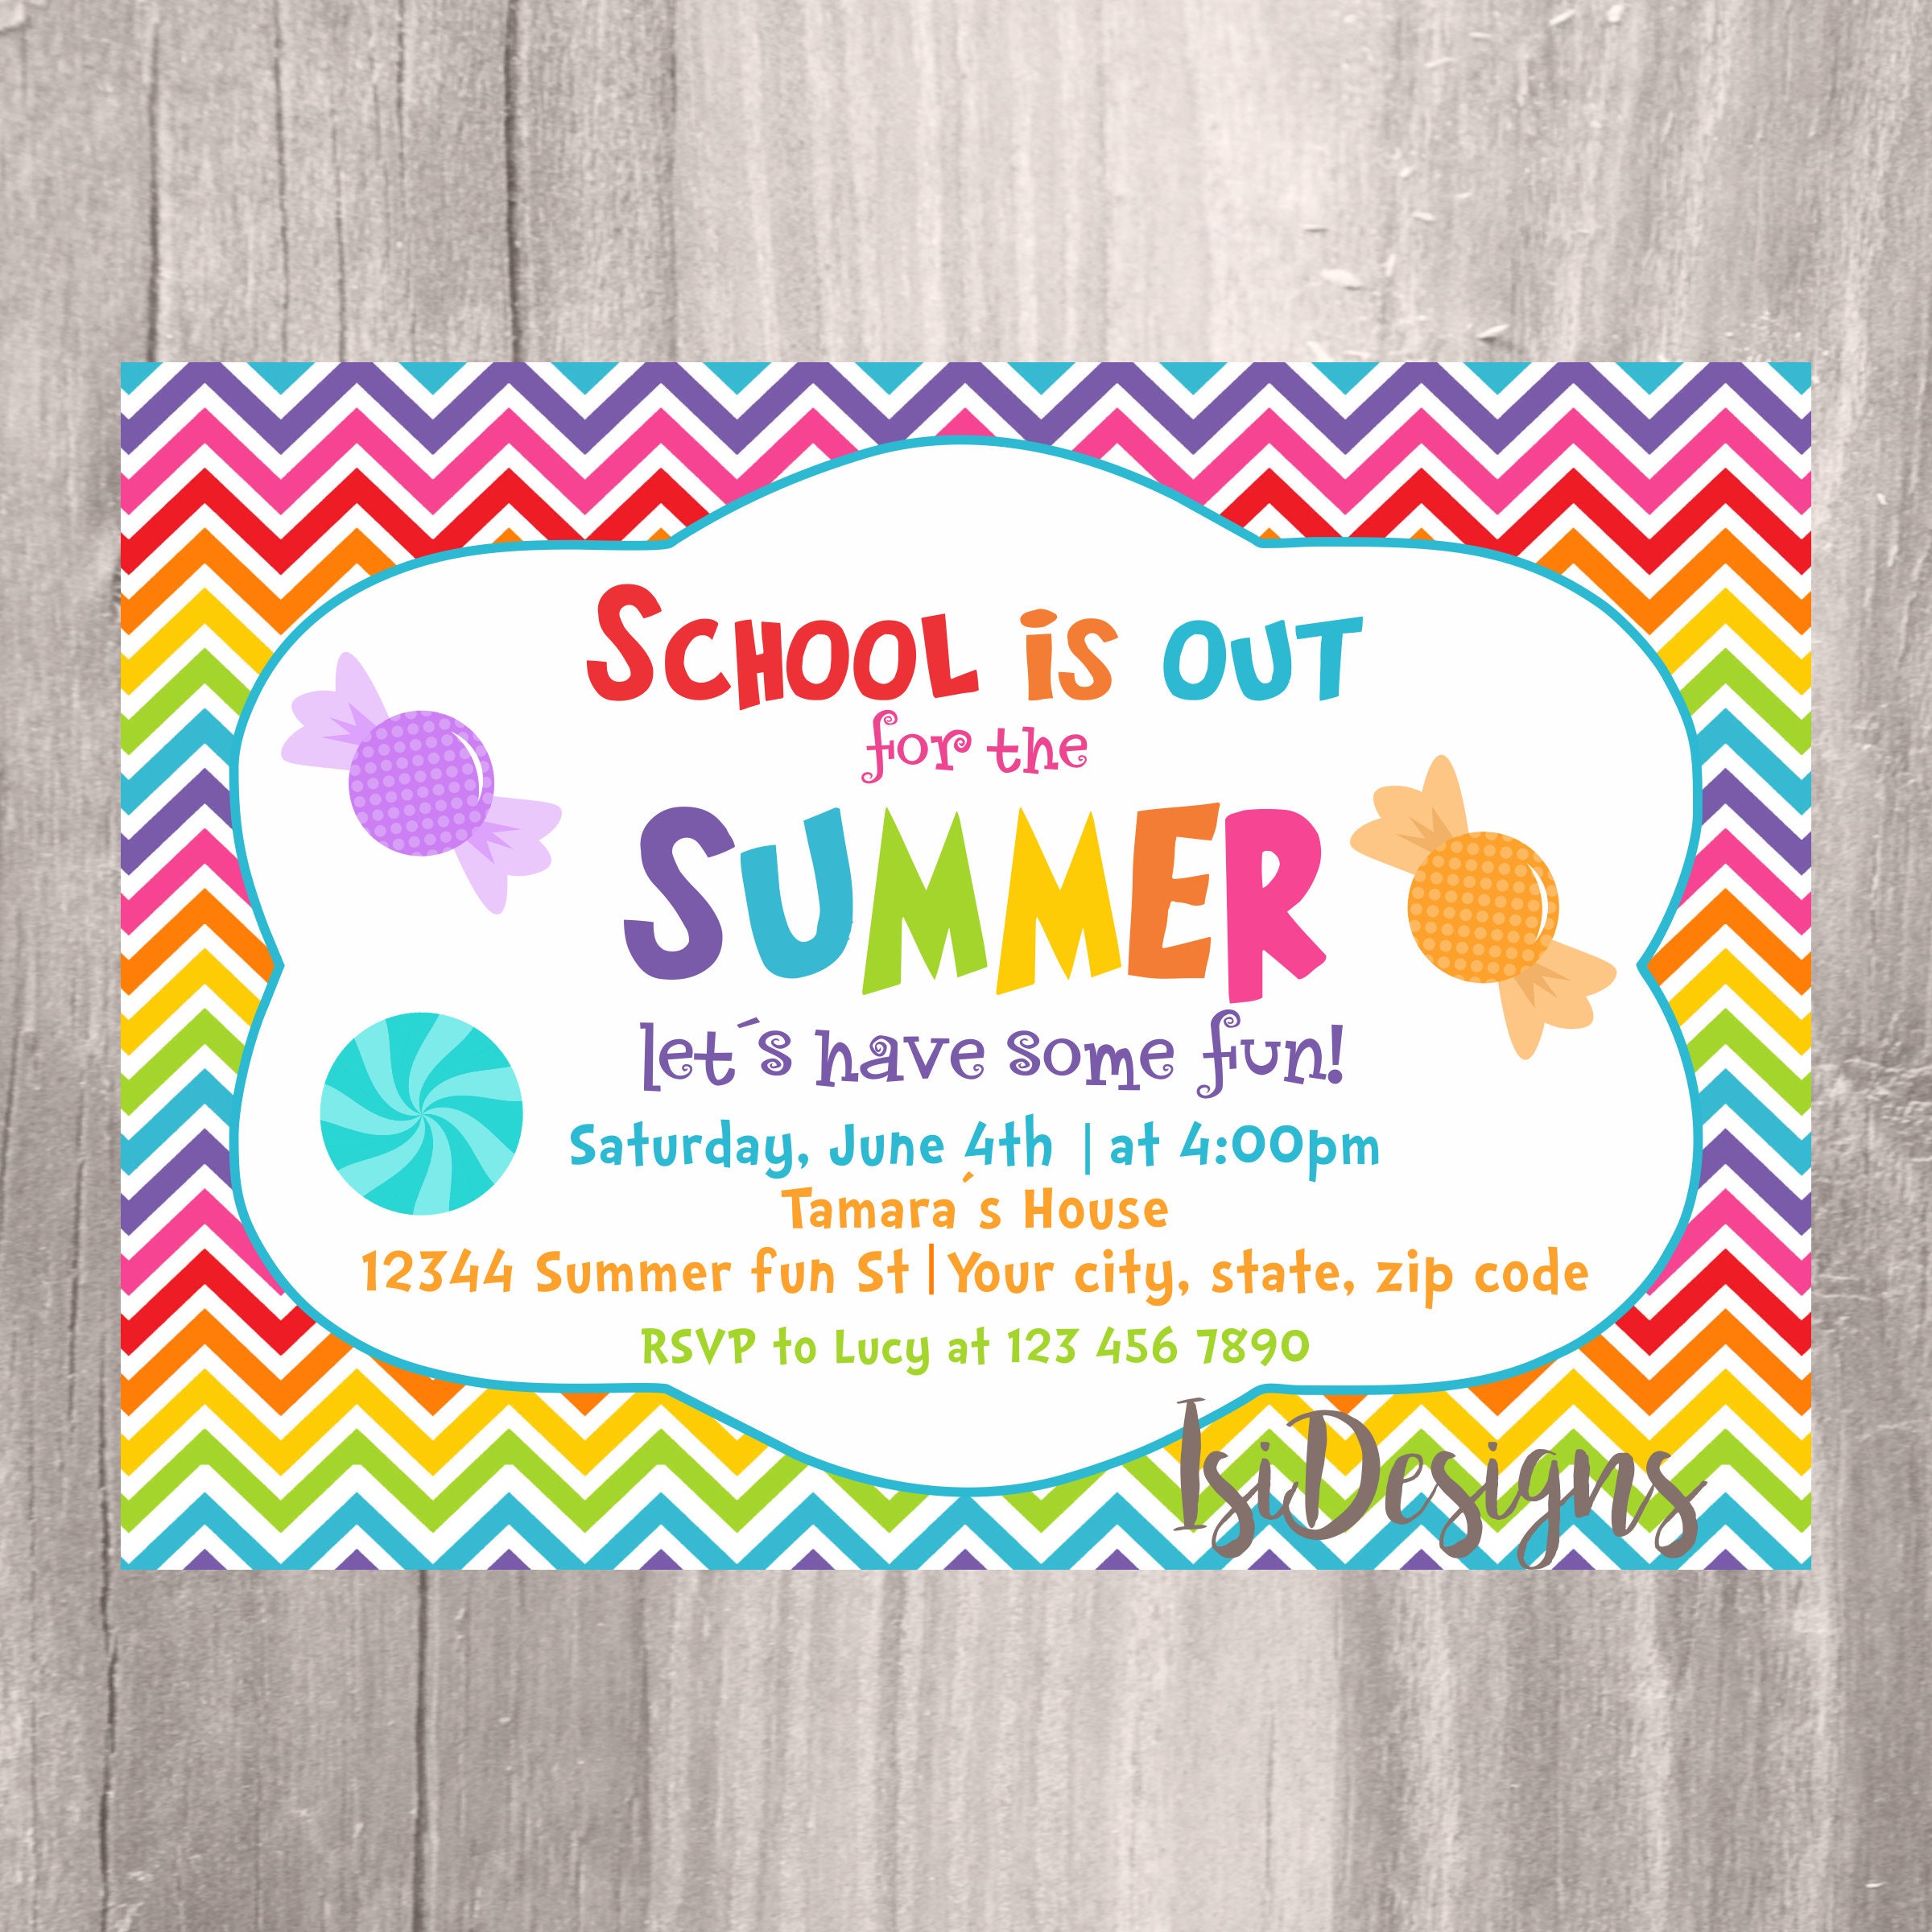 end-of-the-year-party-invitation-summer-party-school-s-etsy